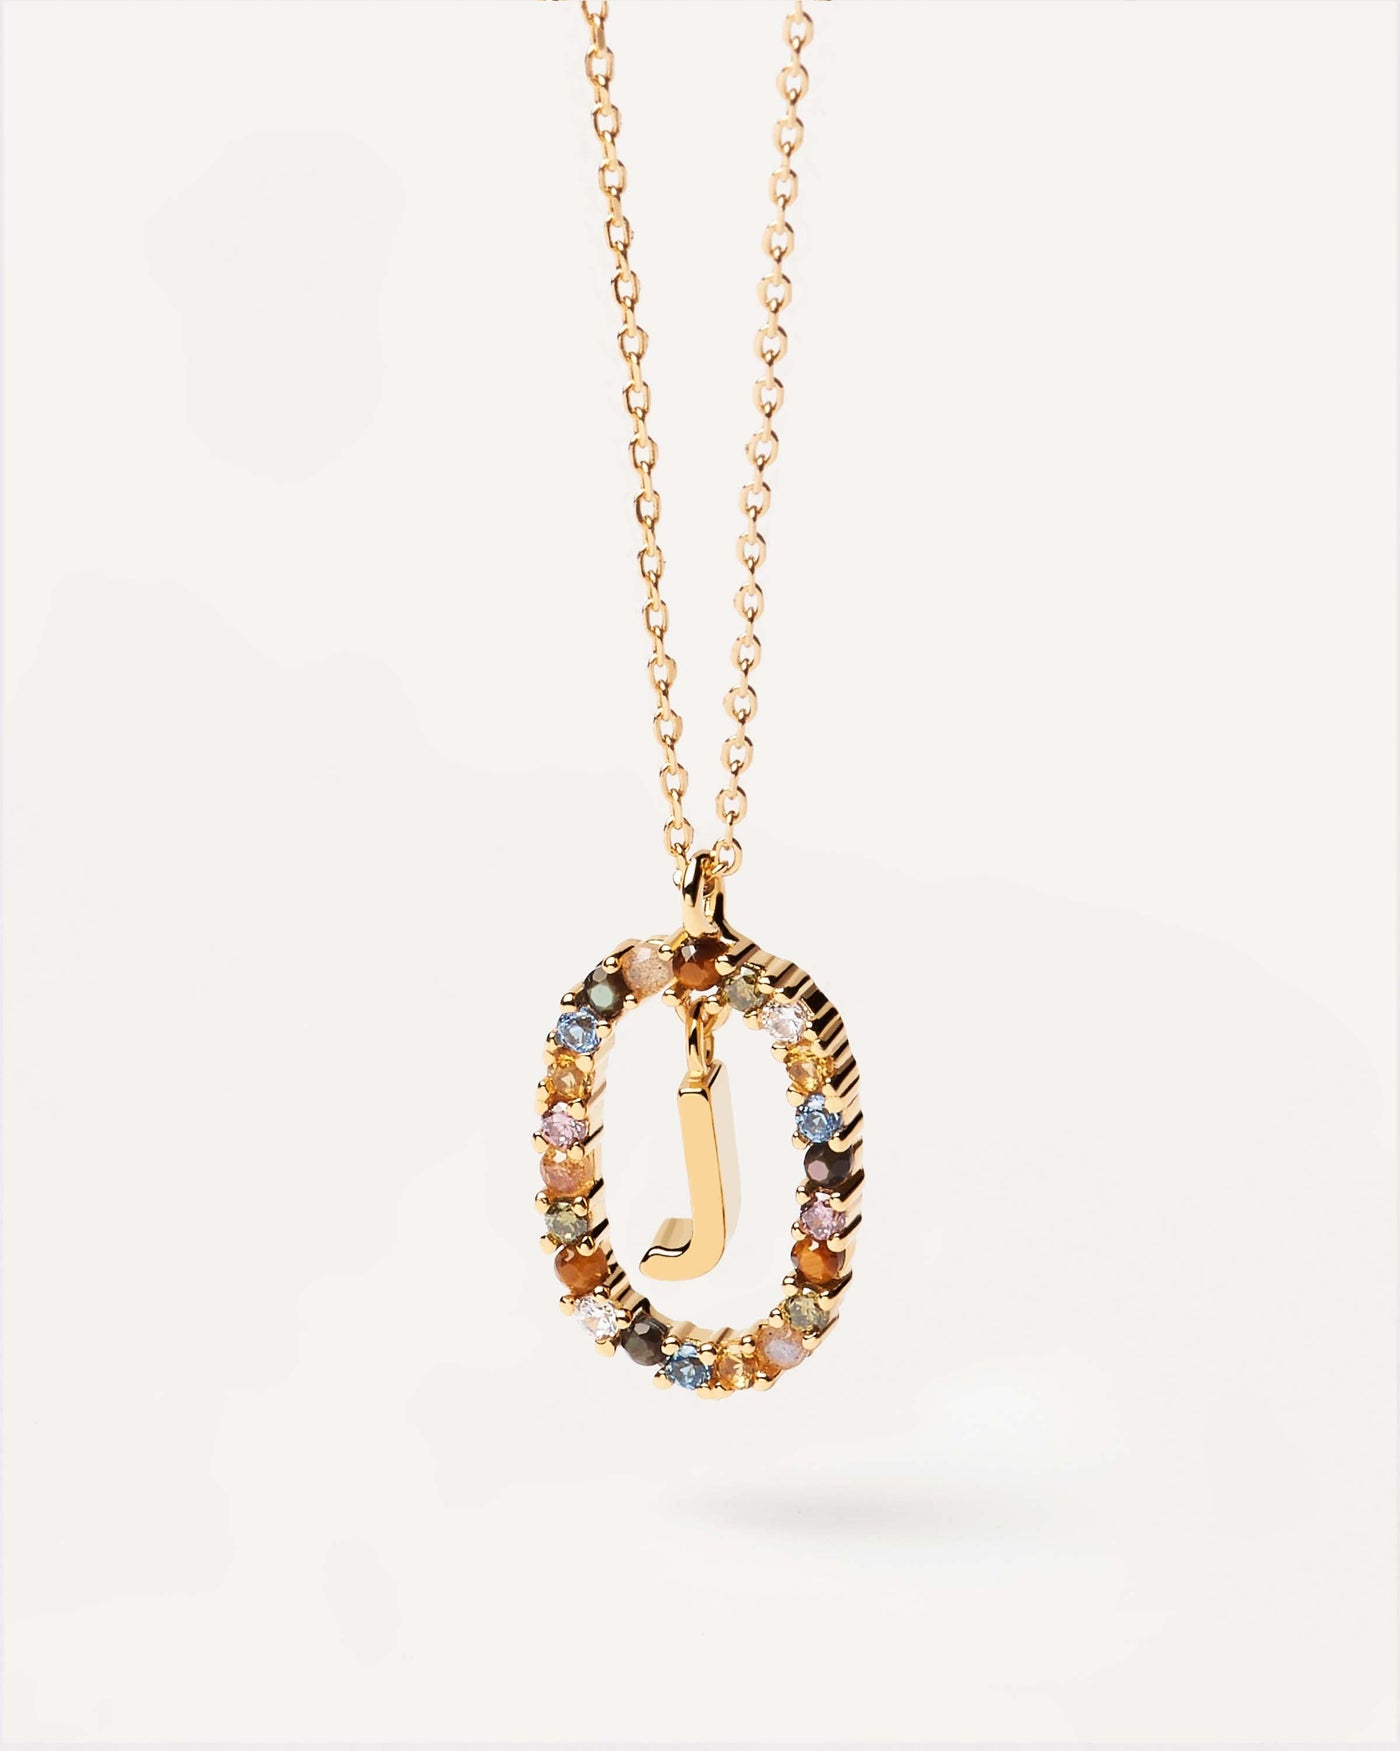 2023 Selection | Letter J necklace. Initial J necklace in gold-plated silver, circled by colorful gemstones. Get the latest arrival from PDPAOLA. Place your order safely and get this Best Seller. Free Shipping.